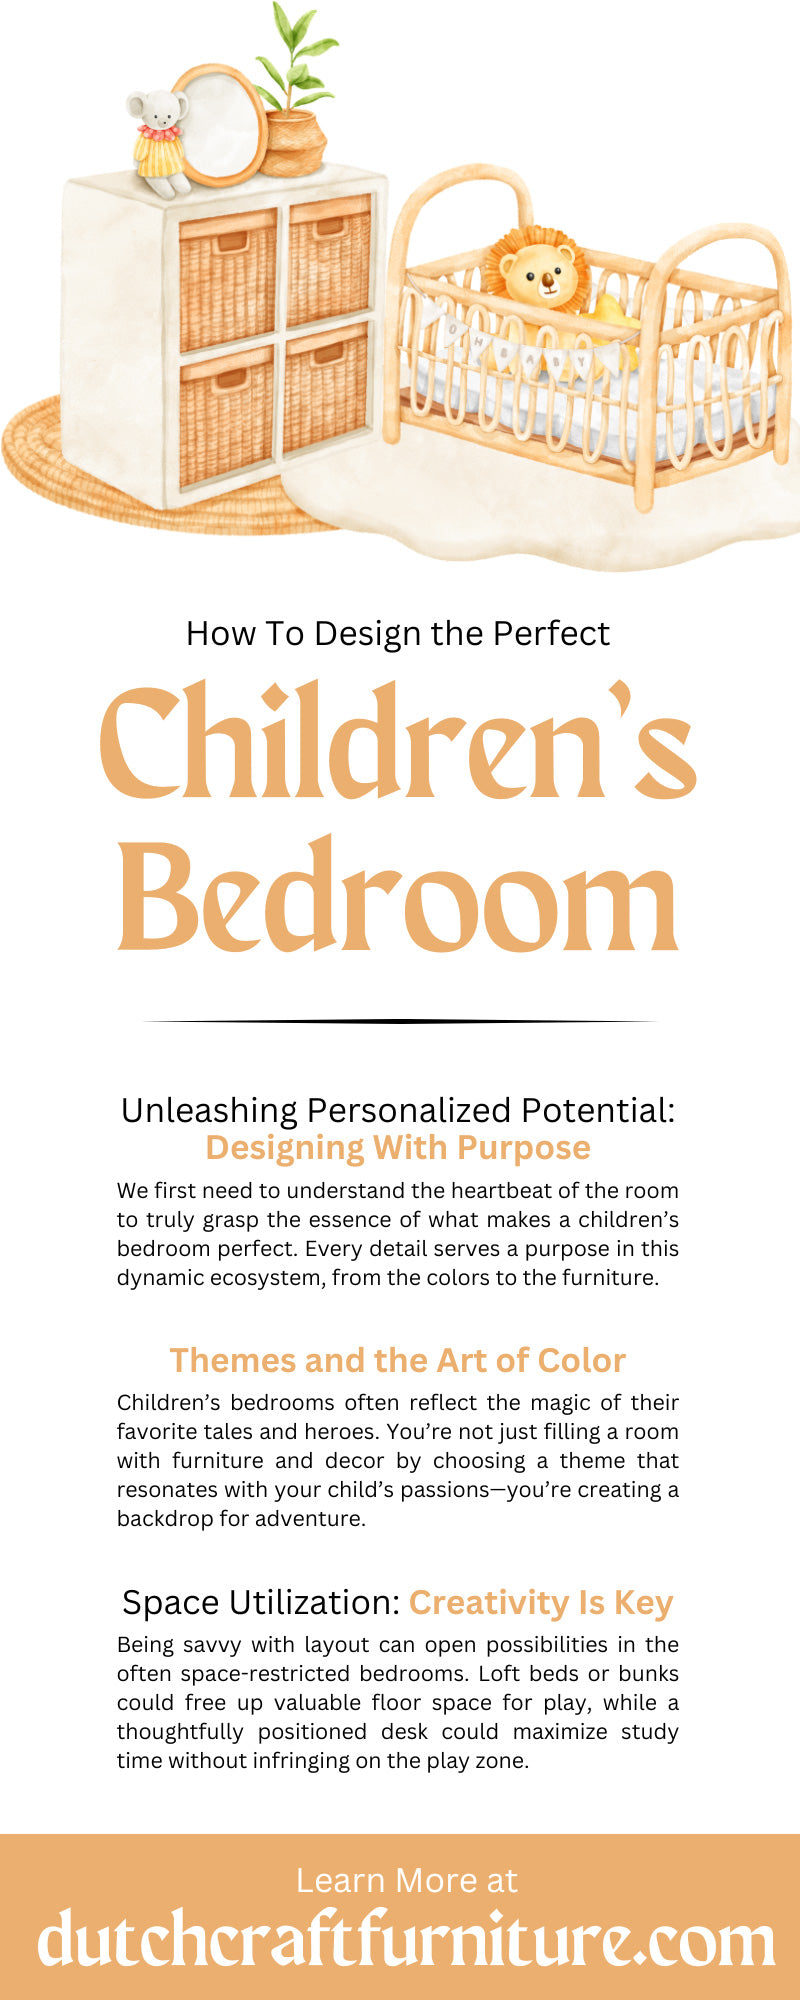 How To Design the Perfect Children’s Bedroom